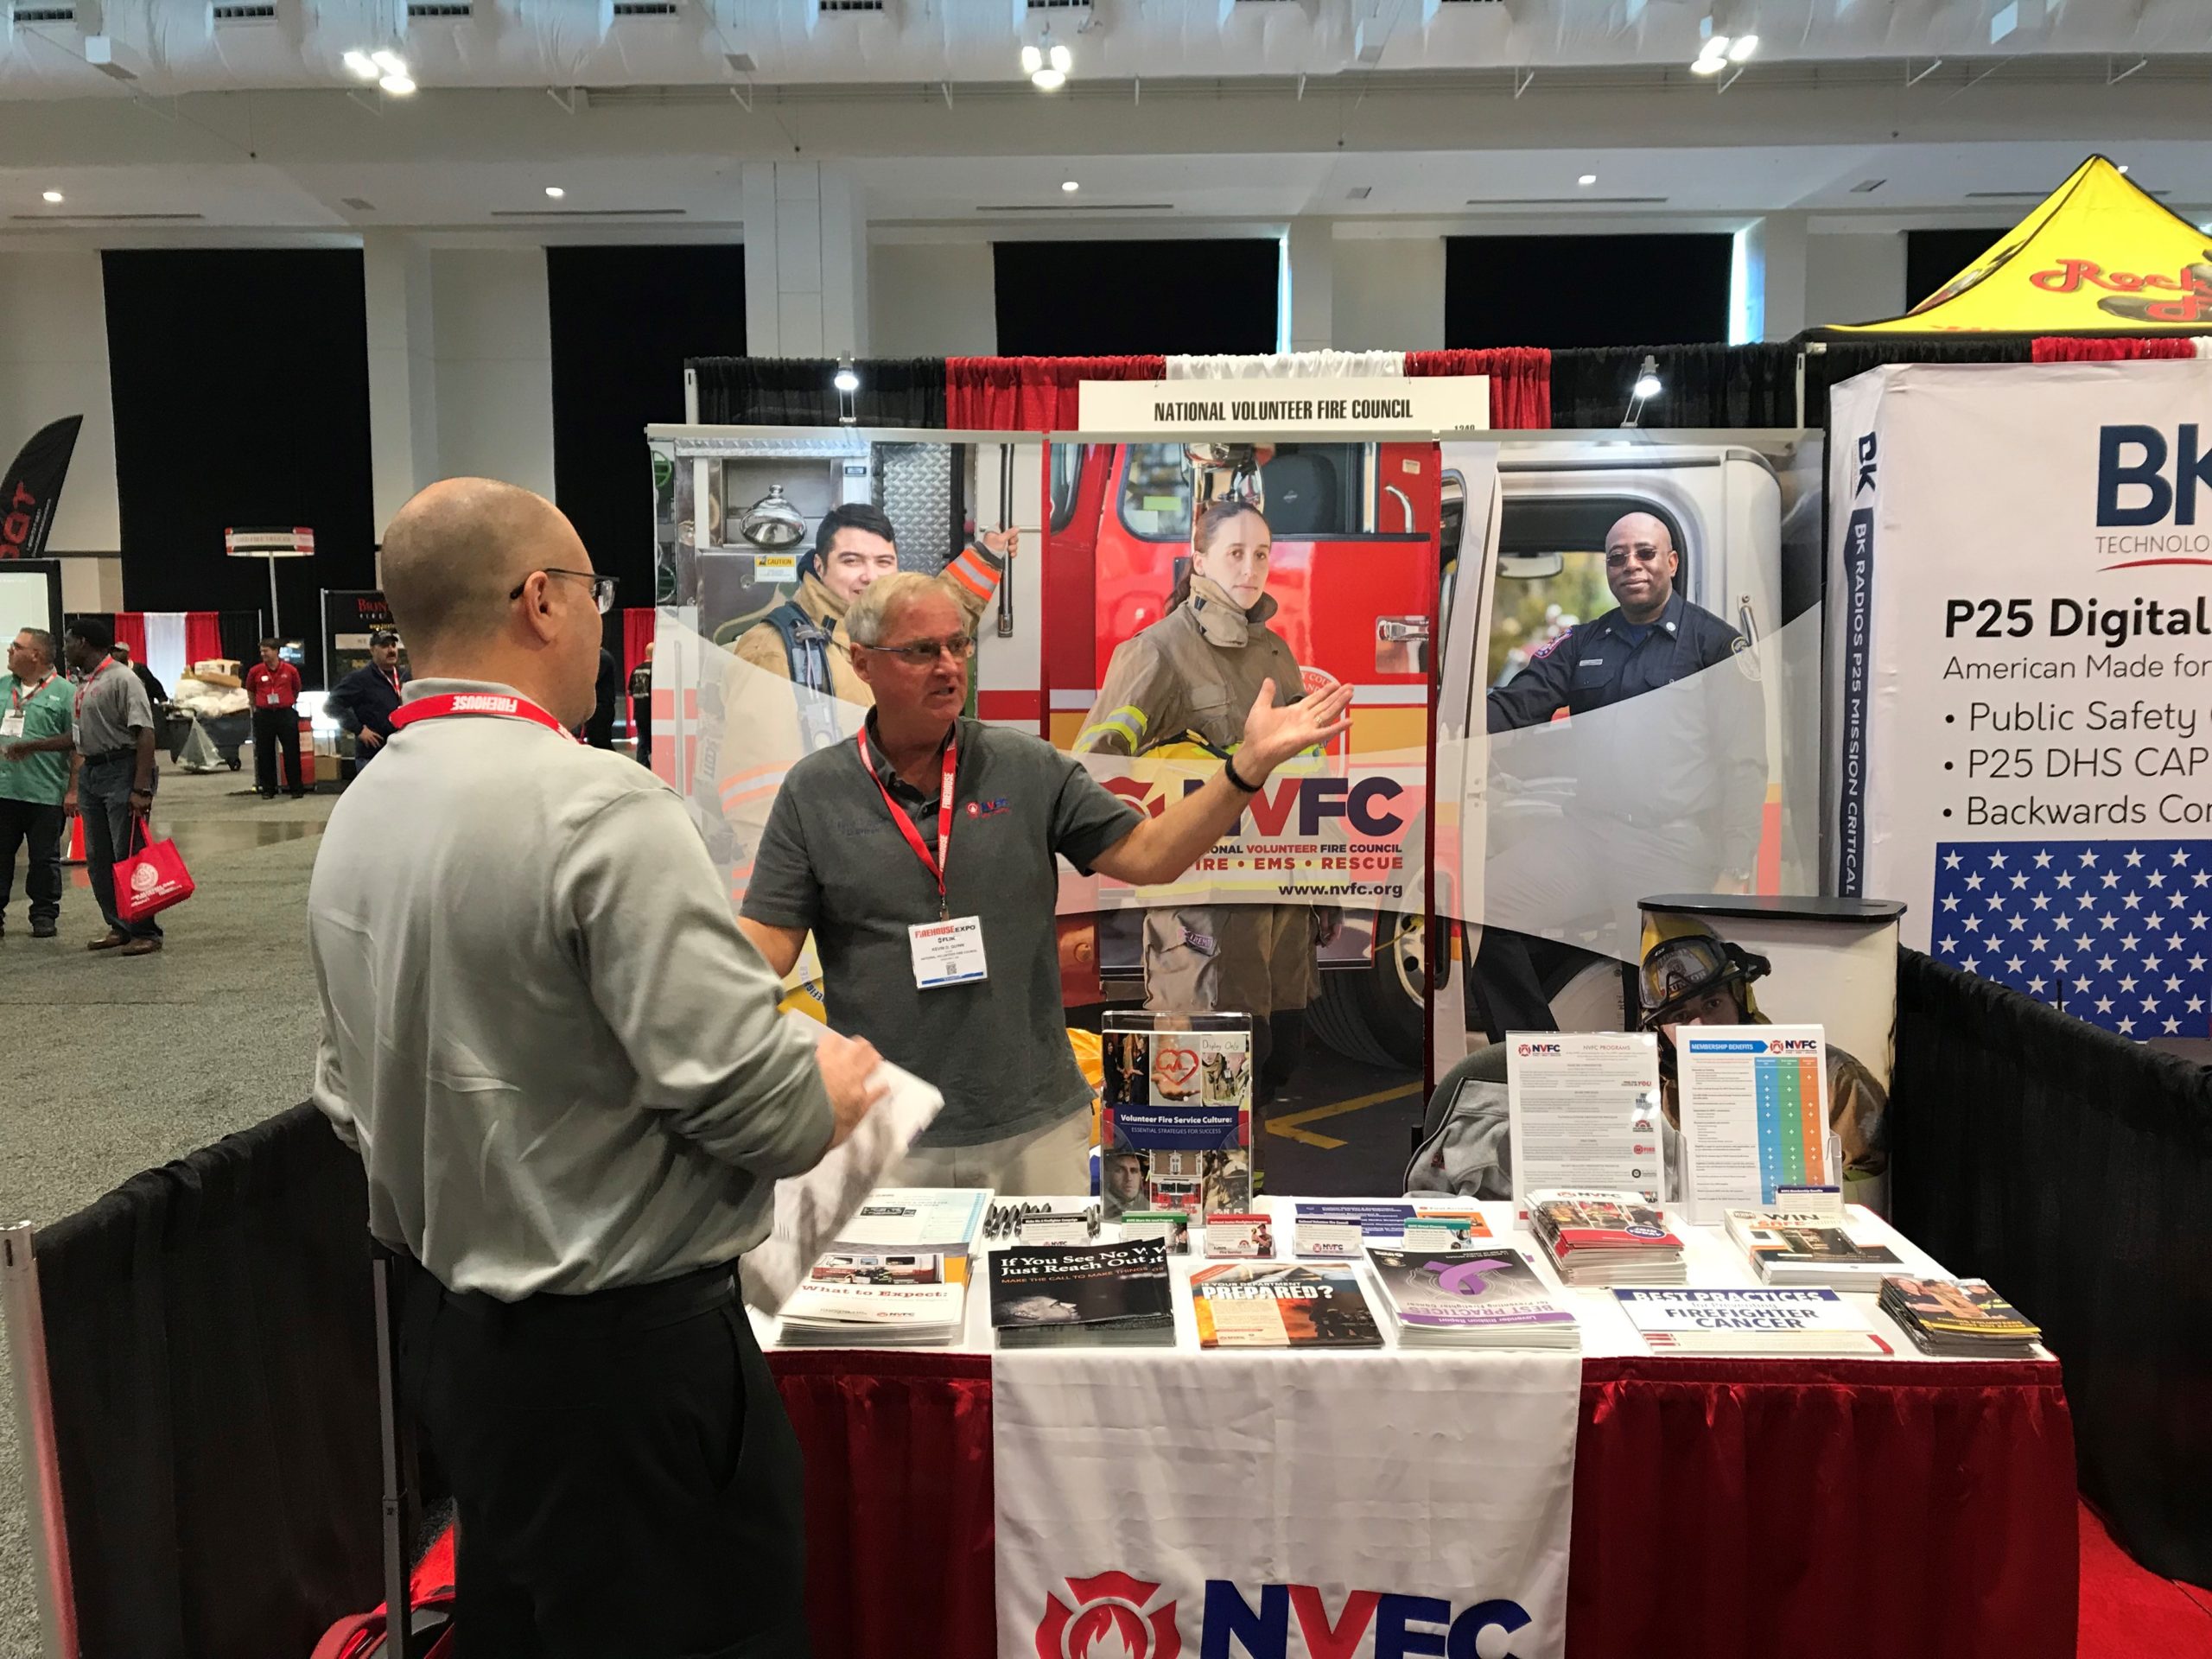 NVFC Members Get Discount to Firehouse Expo - National Volunteer Fire